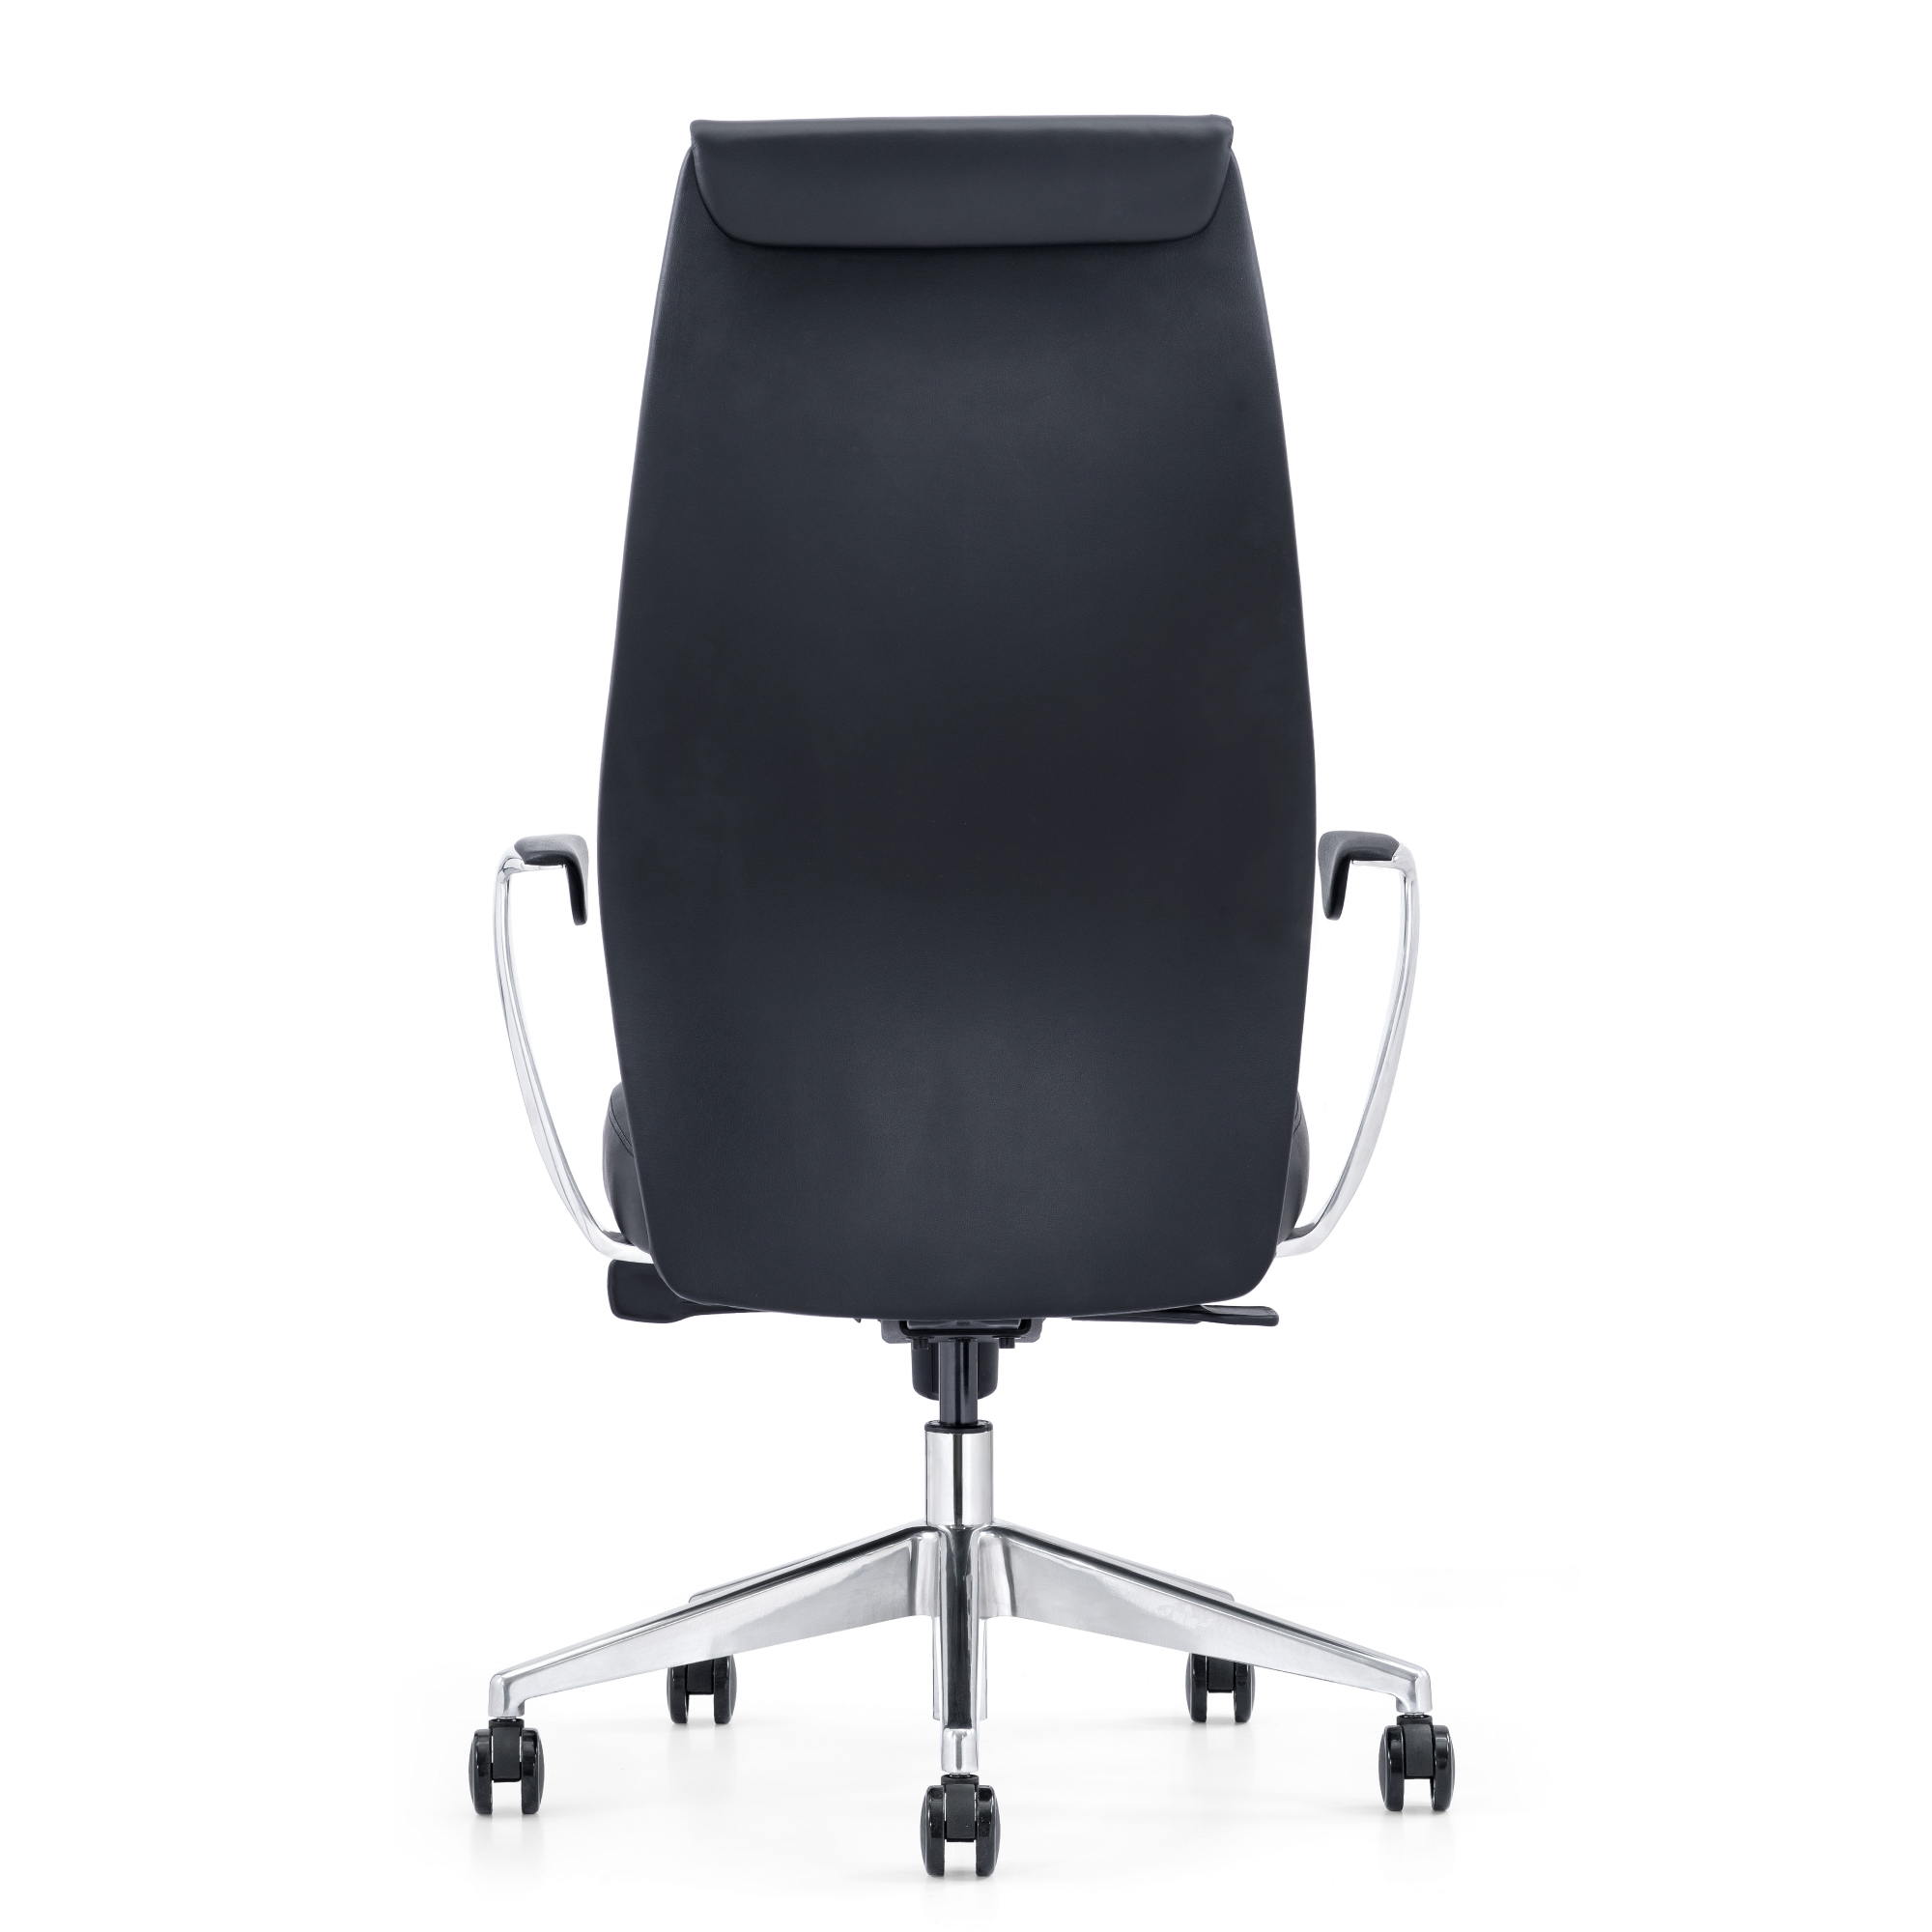 https://buzzseatinghomeoffice.com/wp-content/uploads/2020/09/chair-leather-black-high-back-rear-view-LOD58.jpg